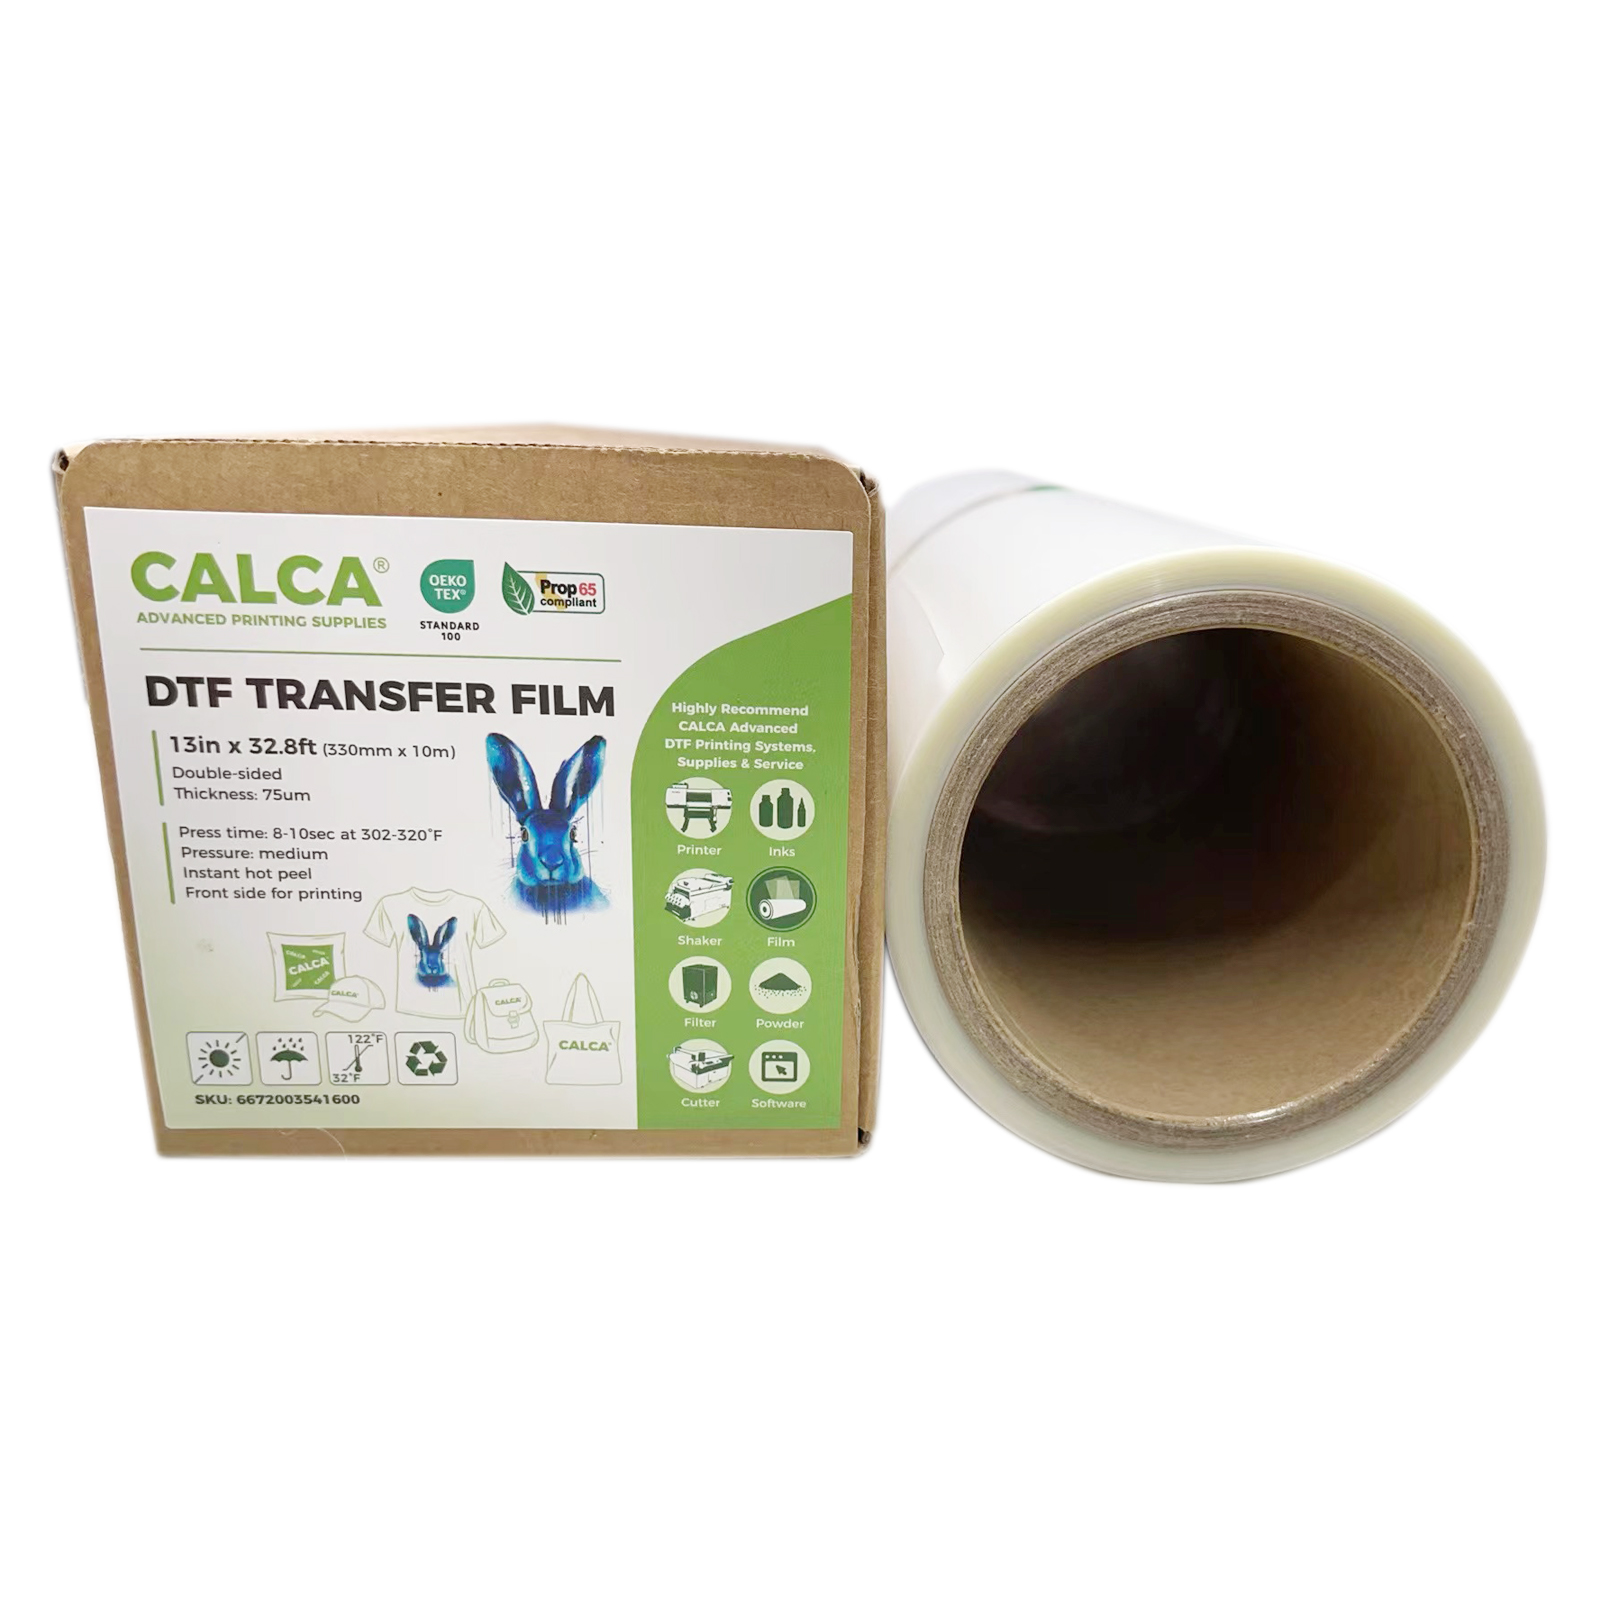 Sample CALCA Instant Hot Peel 13in x 32.8ft DTF Transfer Film, Double Sided